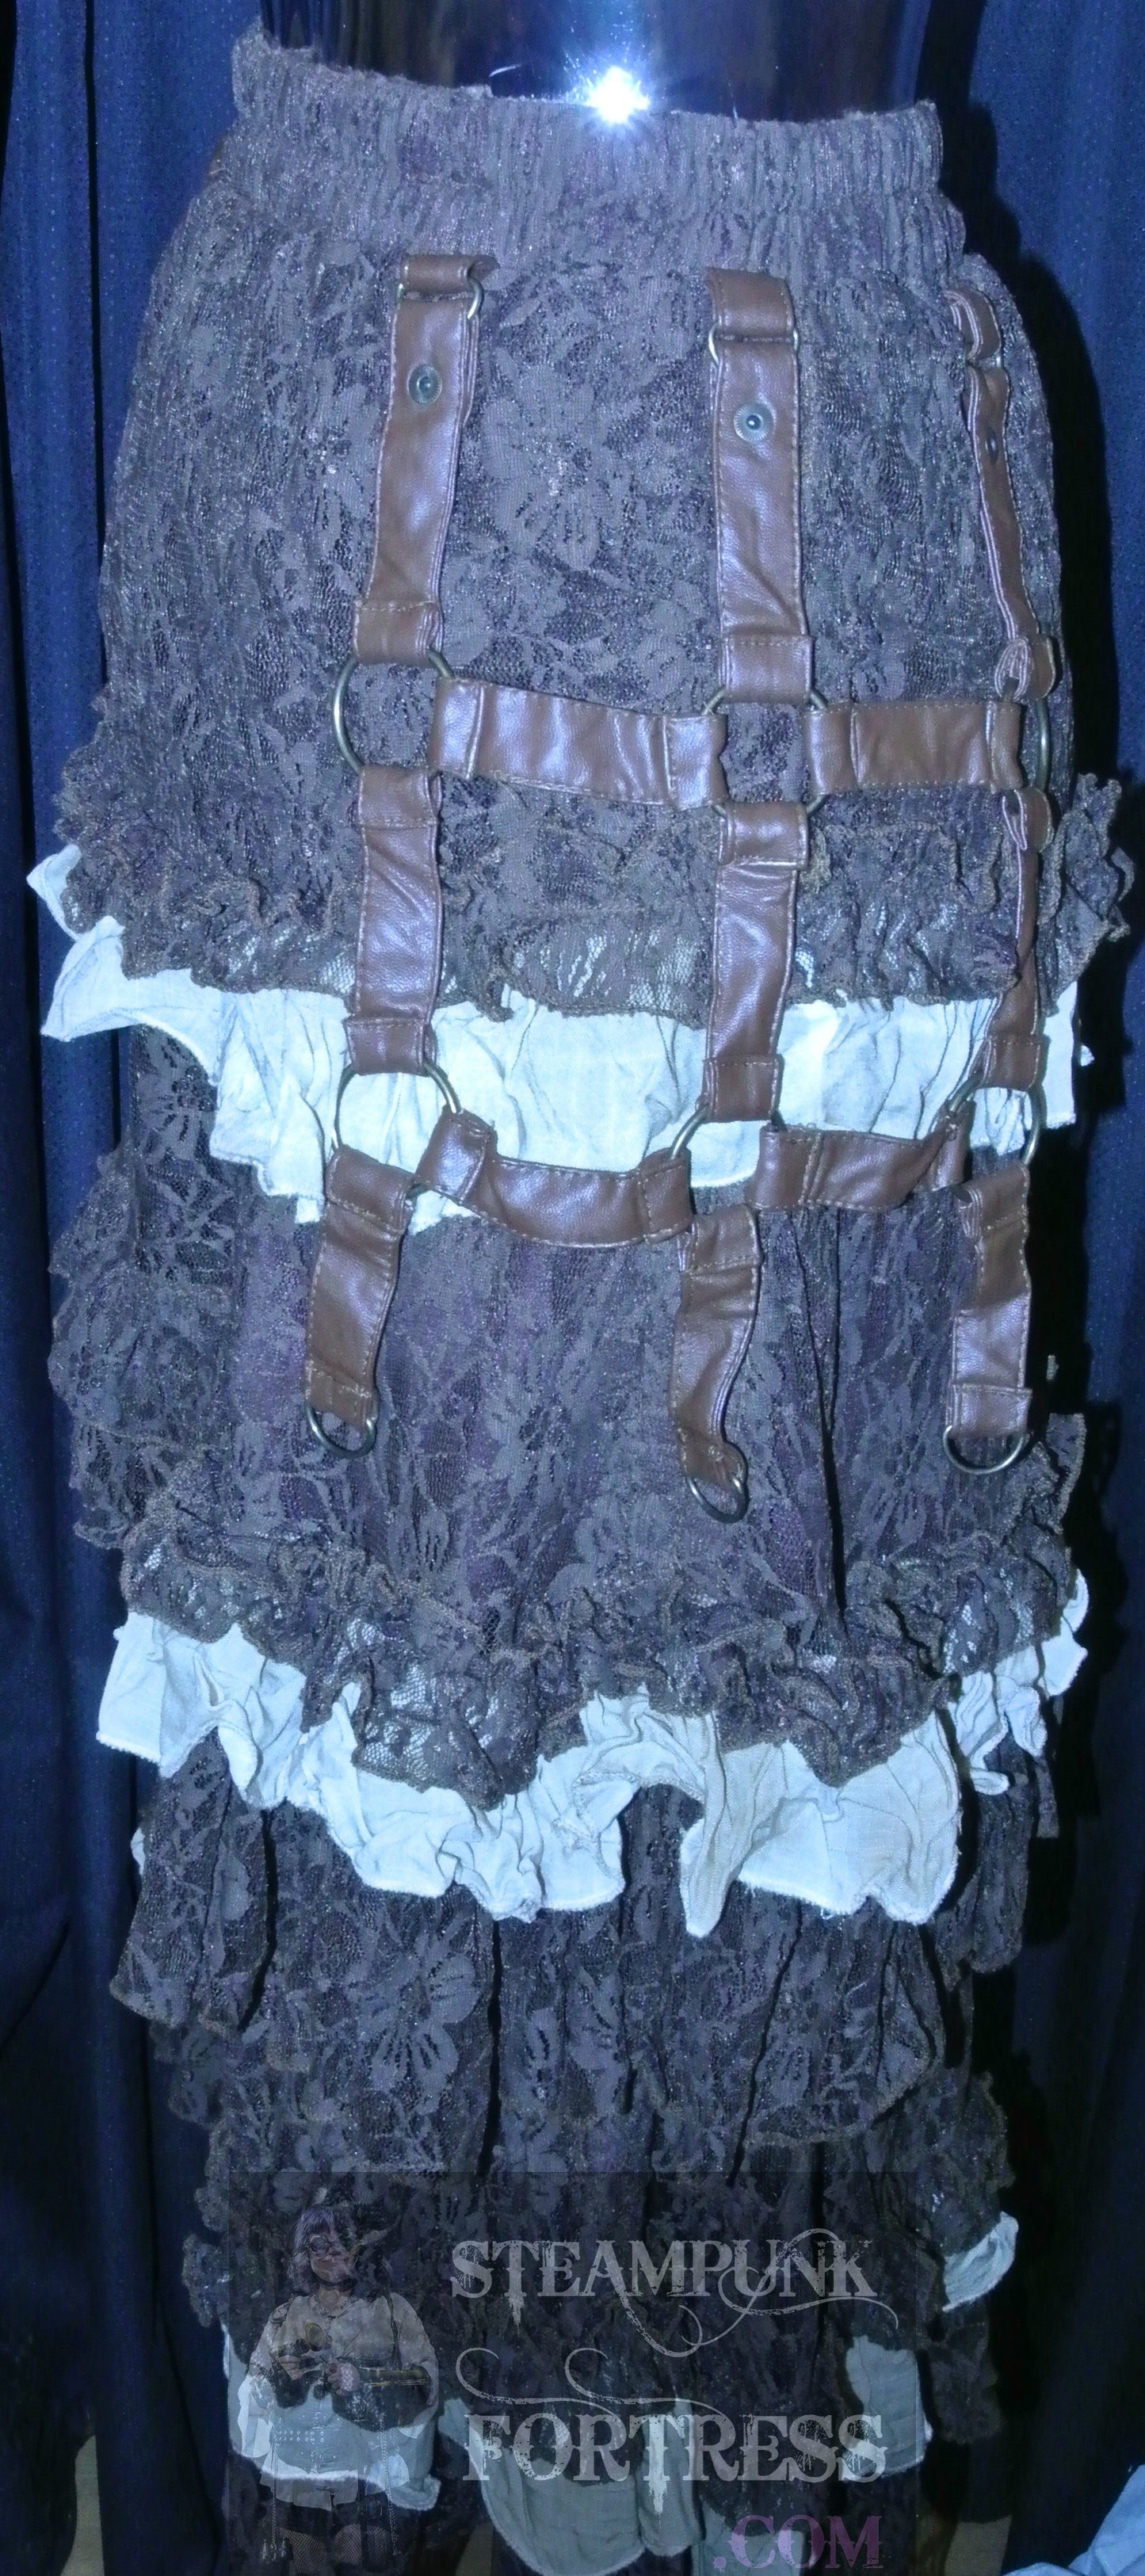 BROWN HIGH LOW HI LO STEAMPUNK SKIRT LAYERED LACE SIDE BAG PURSE AREA TO CLIP ACCESSORIES RUCHED RUFFLES SMALL MEDIUM LARGE **DISCONTINUED** MASS PRODUCED